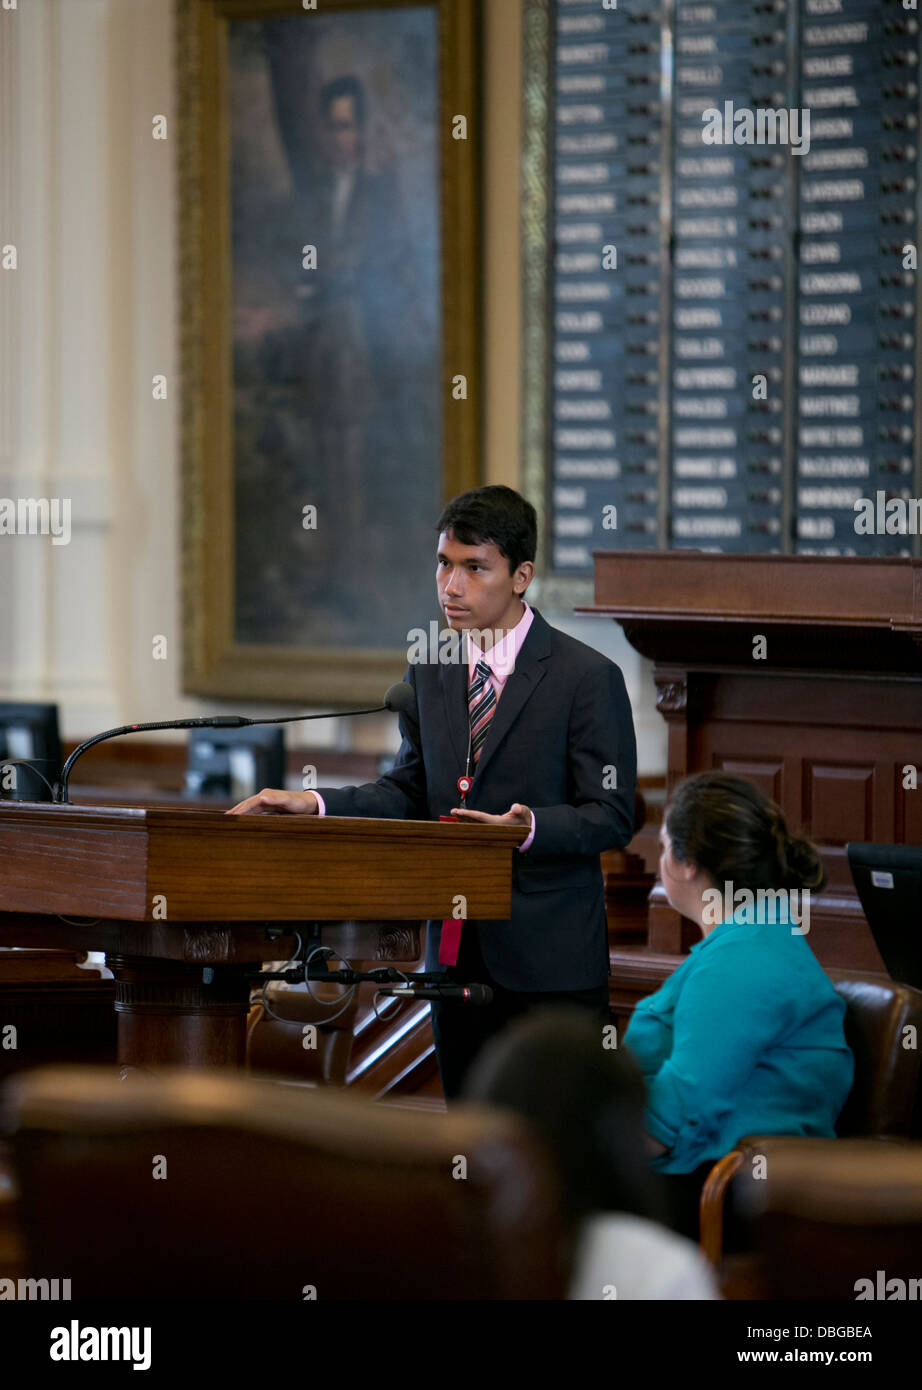 High school students participate in a mock legislative session at the Texas State Capitol in Austin, Texas. Stock Photo